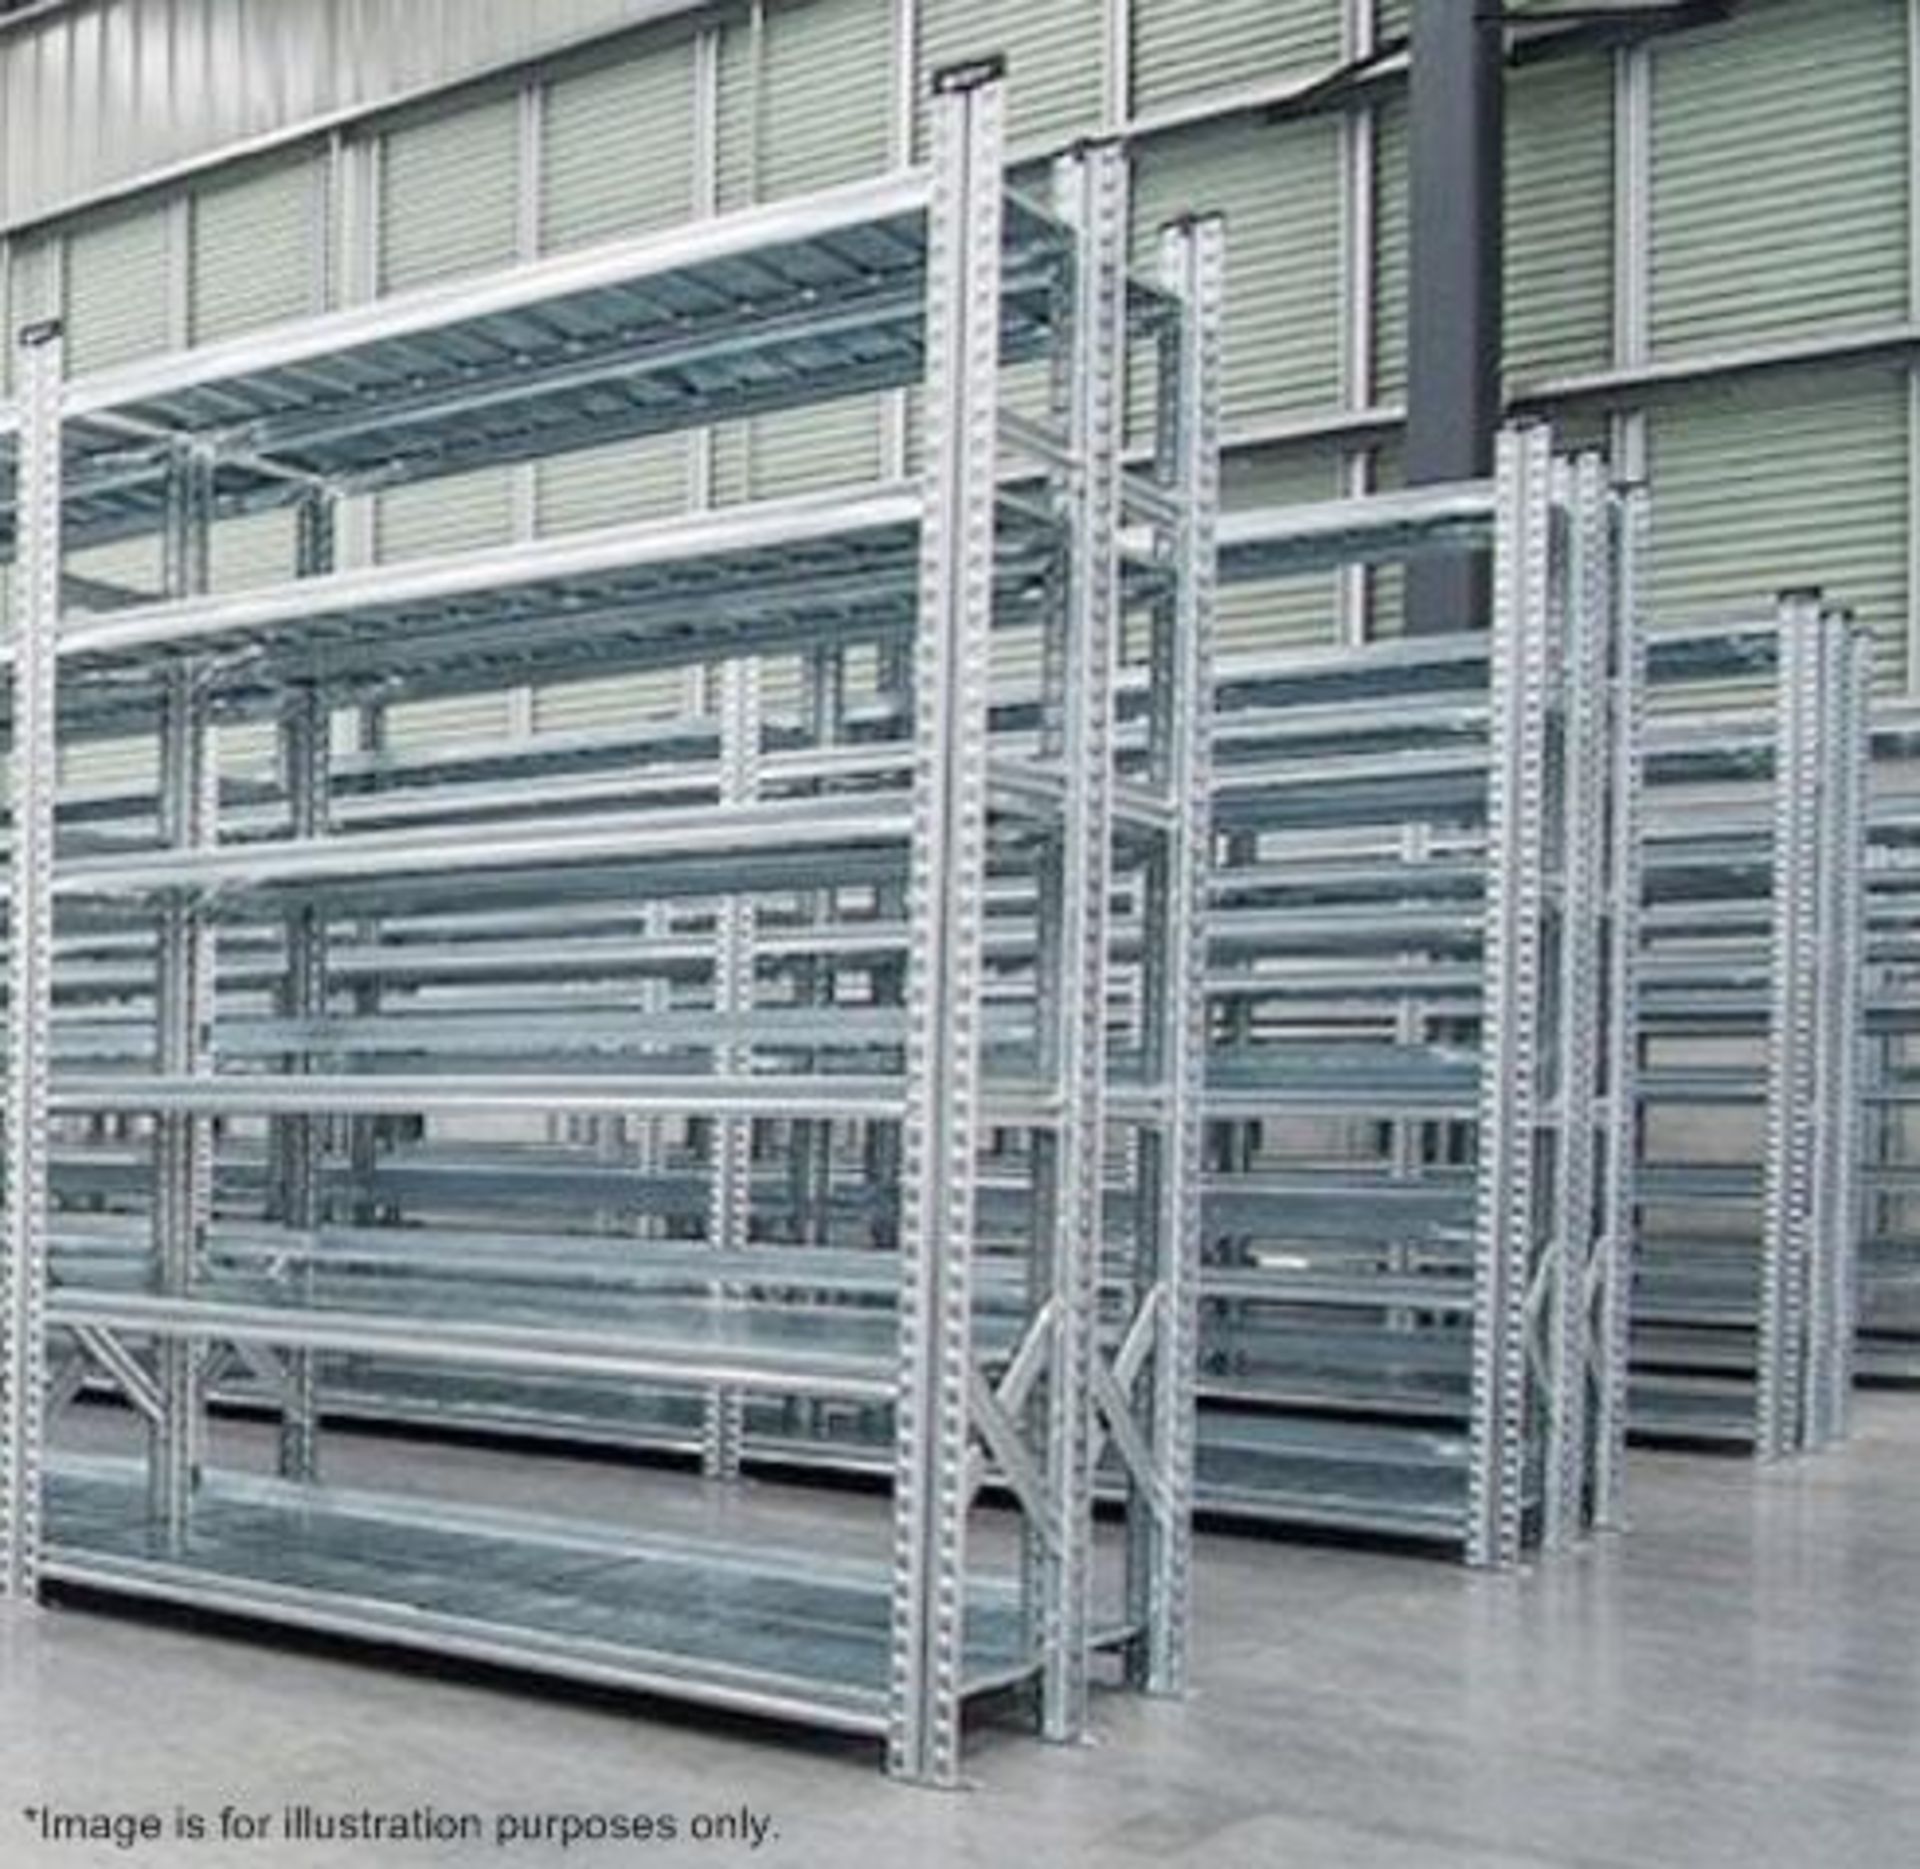 4 x Bays of Metalsistem Steel Modular Storage Shelving - Includes 37 Pieces - Recently Removed - Image 16 of 17